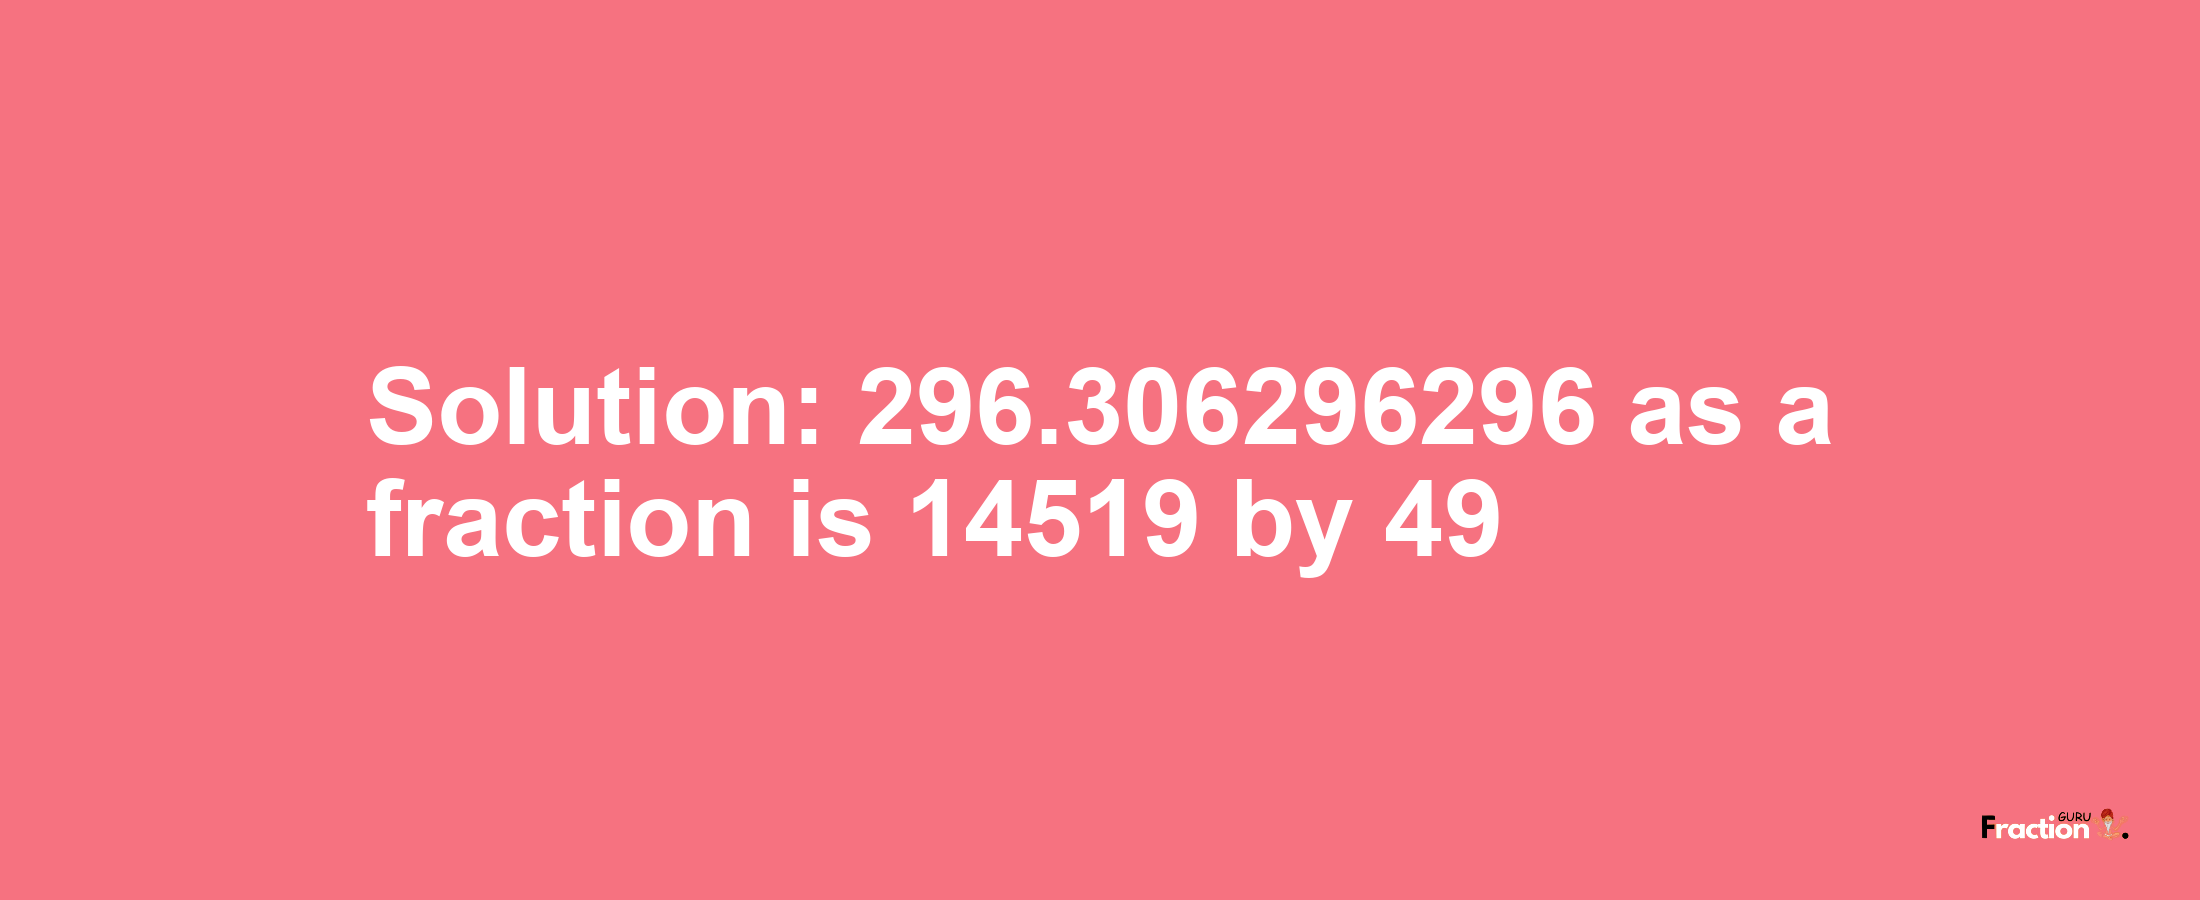 Solution:296.306296296 as a fraction is 14519/49